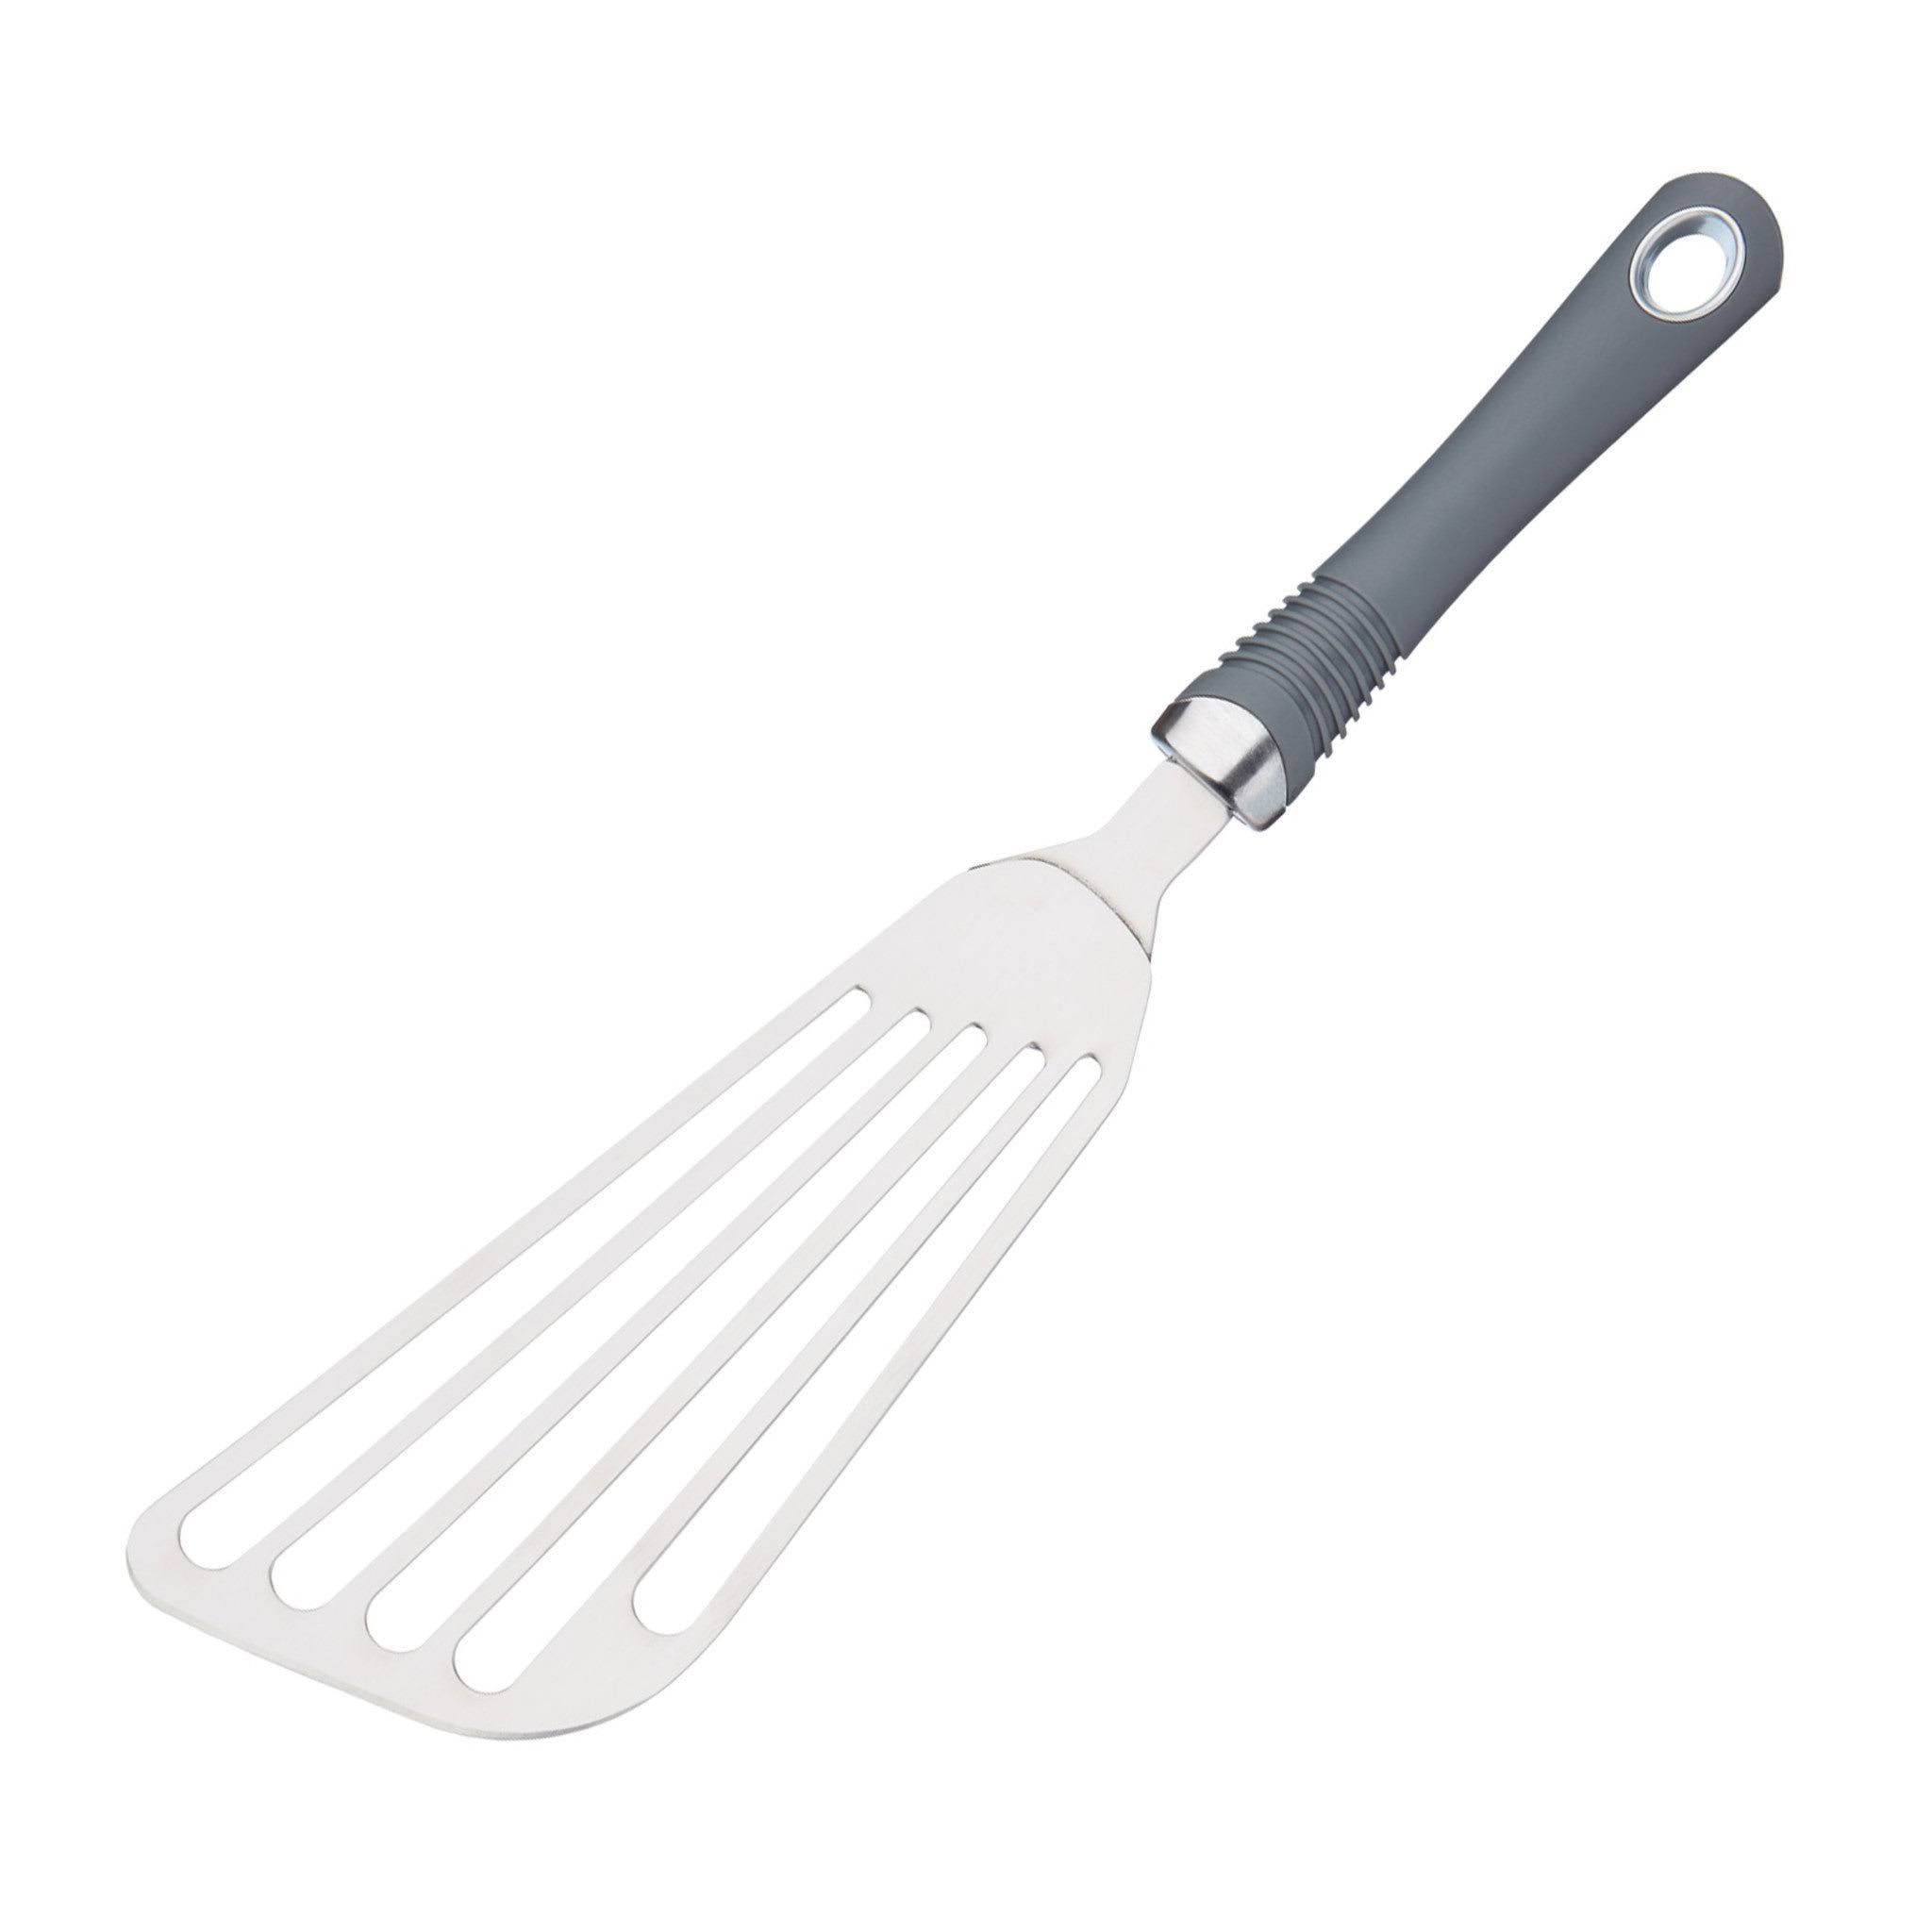 KitchenCraft Professional Fish Slice with Soft Grip Handle 31.5 cm 12.5inch